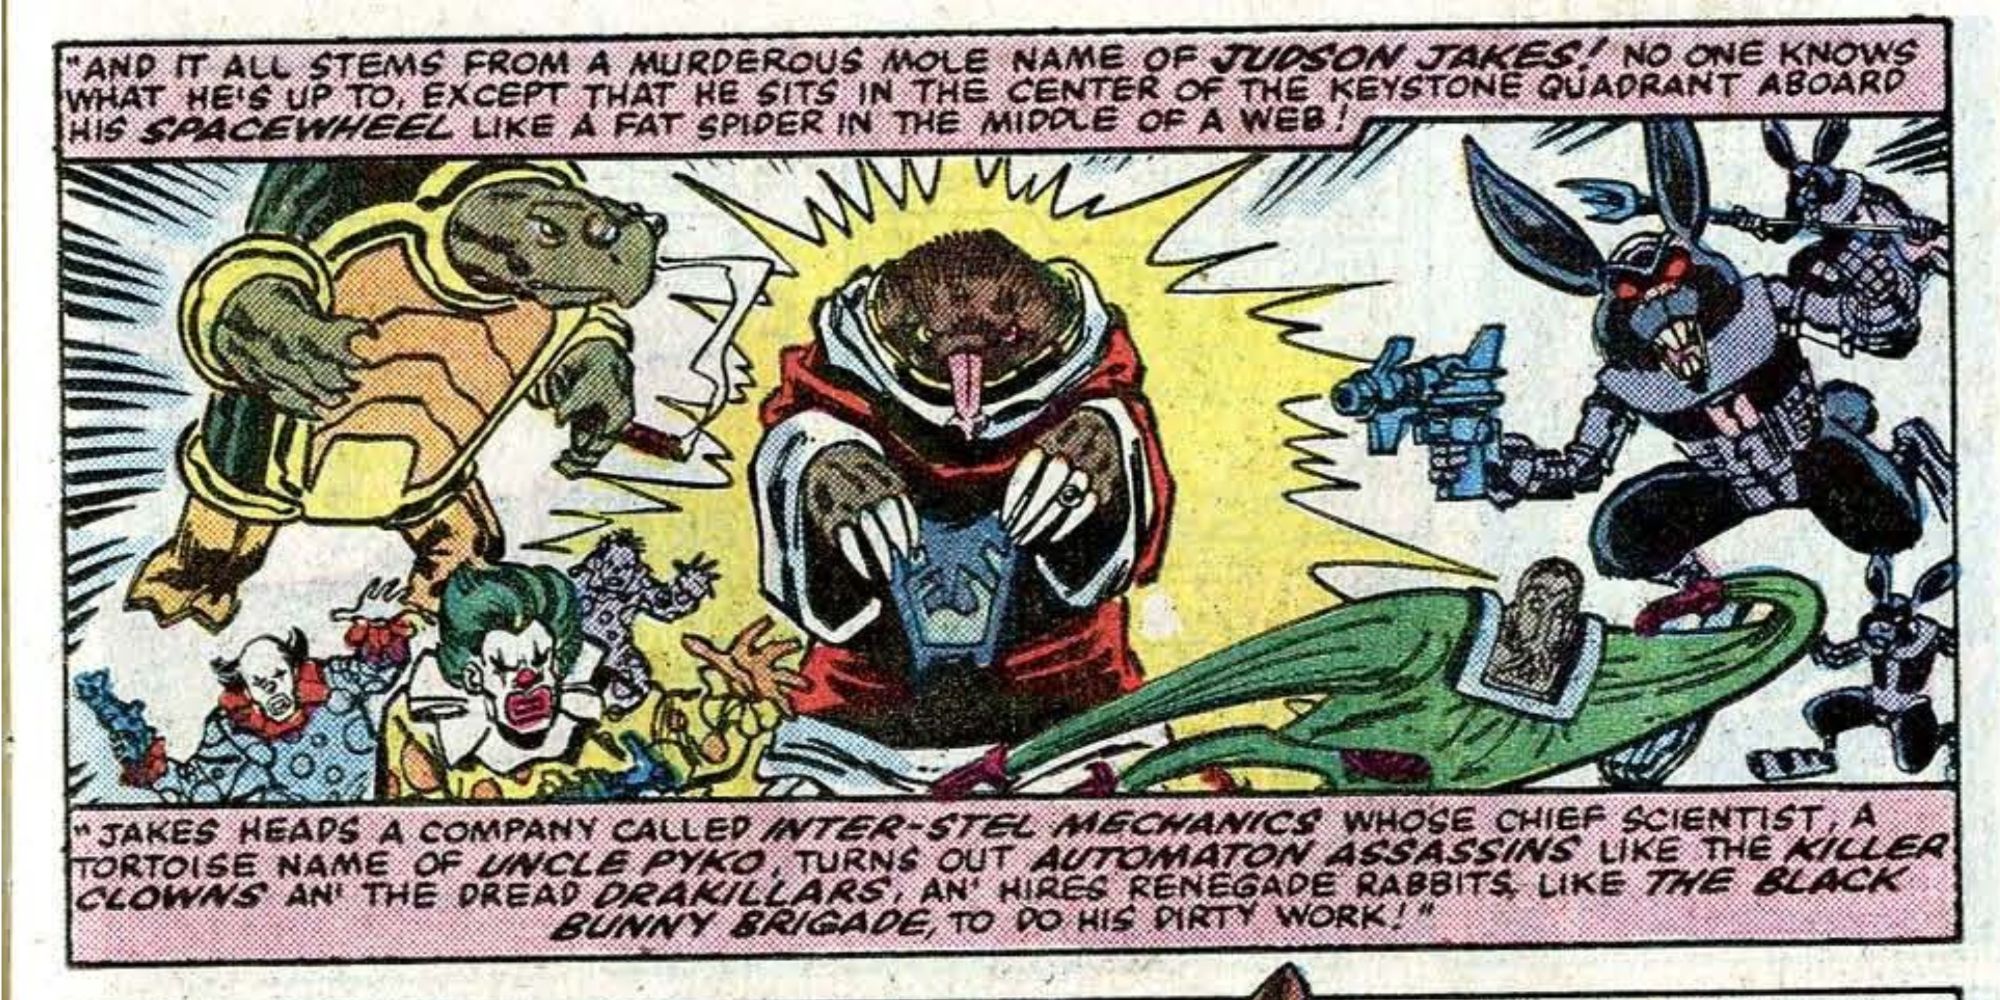 Judson Jakes and other animal villains appear in Marvel Comics.